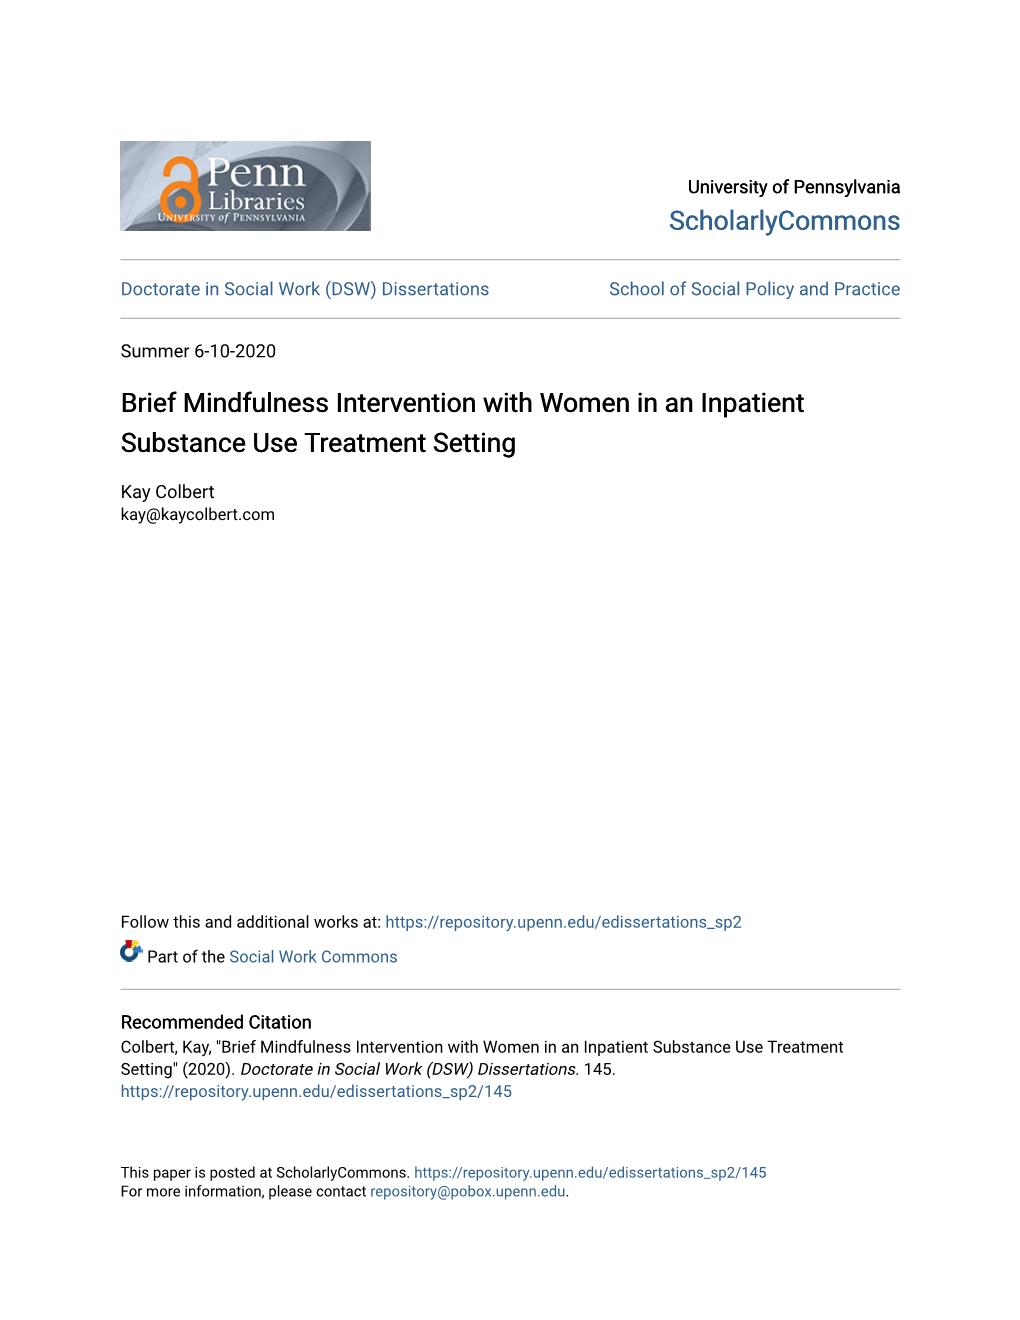 Brief Mindfulness Intervention with Women in an Inpatient Substance Use Treatment Setting